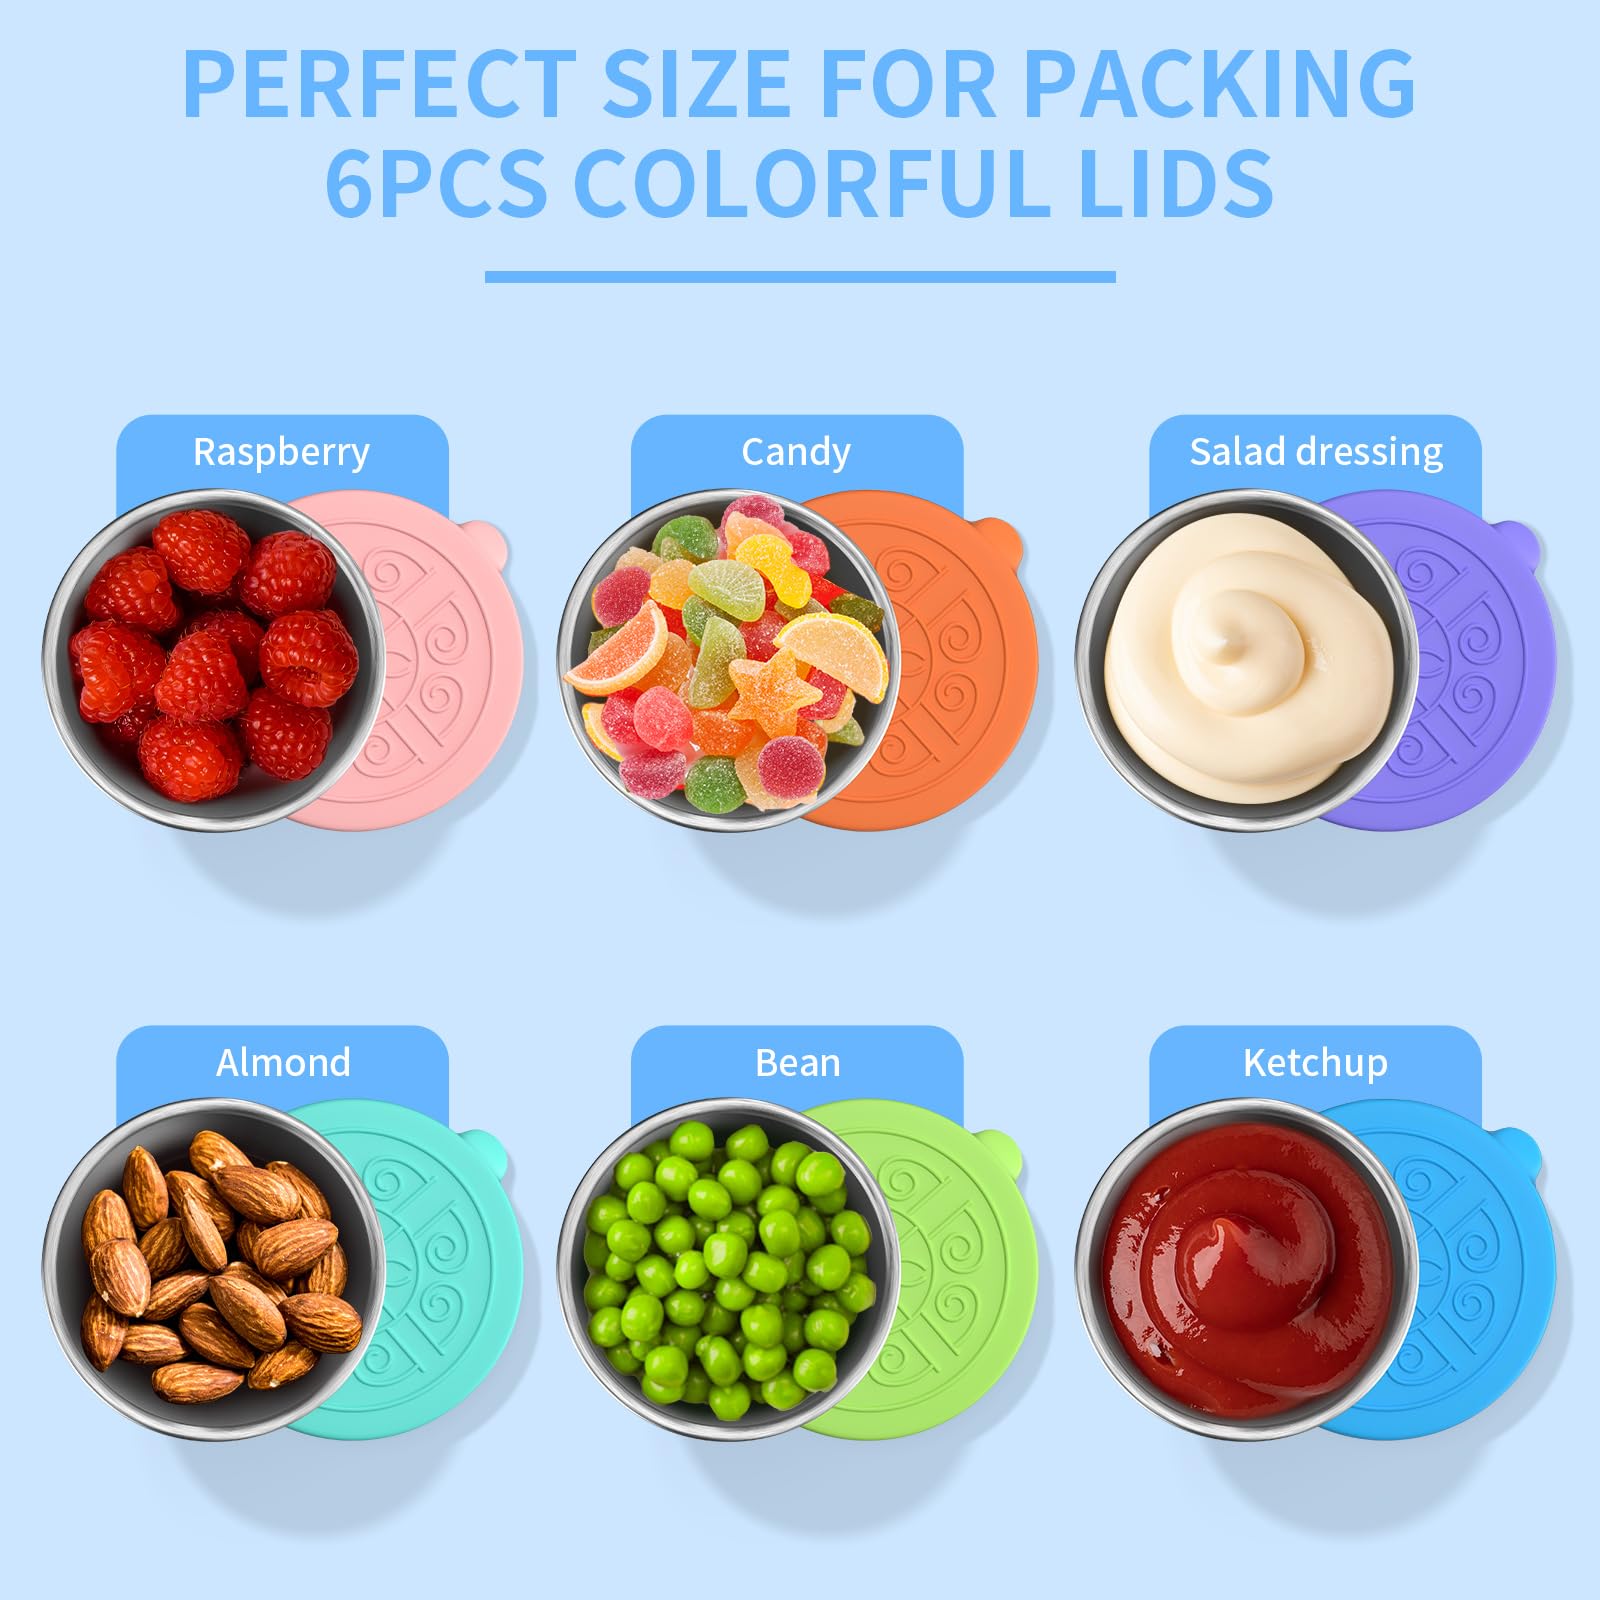 6 Pack Salad Dressing Container To Go, 1.7oz/50ml Reusable Small Condiment Containers with Lids, Leakproof Silicone Lids Stainless Steel Sauce Cups Containers for Lunch Box, Picnic and Travel